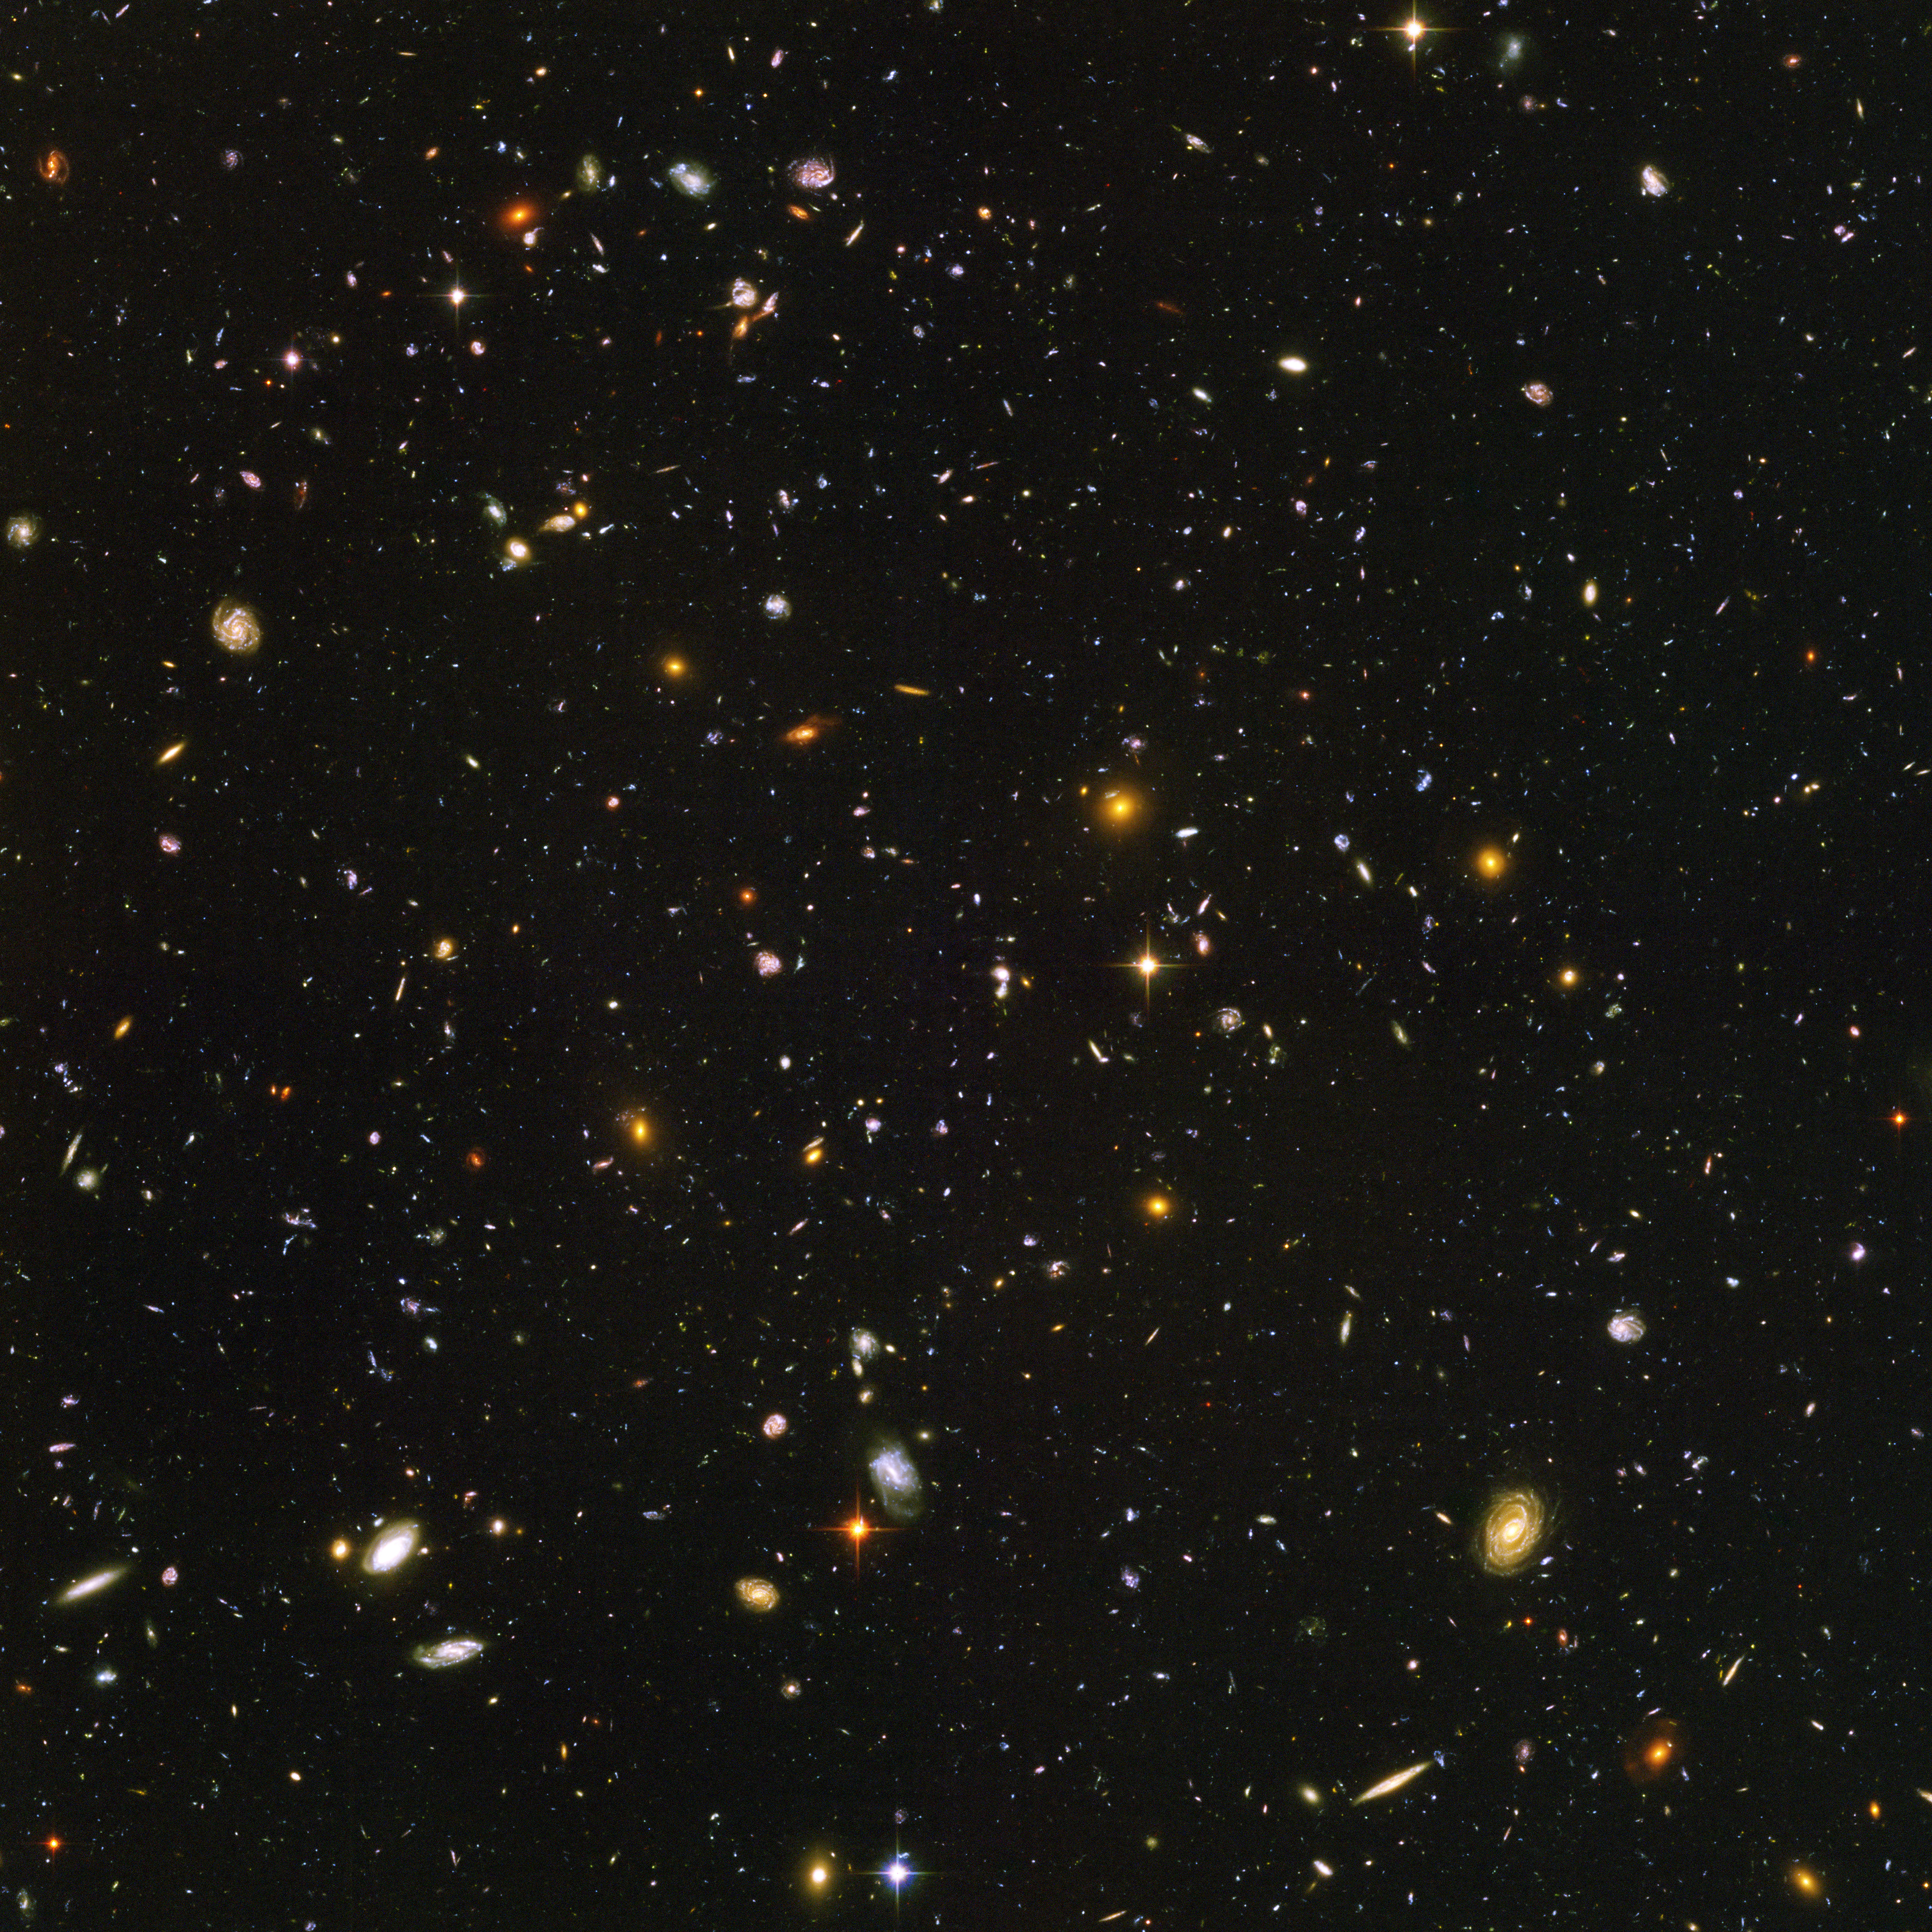 Galaxies, galaxies everywhere - as far as the NASA/ESA Hubble Space Telescope can see. This view of nearly 10,000 galaxies is the deepest visible-light image of the cosmos. Called the Hubble Ultra Deep Field, this galaxy-studded view represents a "deep" core sample of the universe, cutting across billions of light-years. The snapshot includes galaxies of various ages, sizes, shapes, and colours. The smallest, reddest galaxies, about 100, may be among the most distant known, existing when the universe was just 800 million years old. The nearest galaxies - the larger, brighter, well-defined spirals and ellipticals - thrived about 1 billion years ago, when the cosmos was 13 billion years old. In vibrant contrast to the rich harvest of classic spiral and elliptical galaxies, there is a zoo of oddball galaxies littering the field. Some look like toothpicks; others like links on a bracelet. A few appear to be interacting. These oddball galaxies chronicle a period when the universe was younger and more chaotic. Order and structure were just beginning to emerge. The Ultra Deep Field observations, taken by the Advanced Camera for Surveys, represent a narrow, deep view of the cosmos. Peering into the Ultra Deep Field is like looking through a 2.5 metre-long soda straw. In ground-based photographs, the patch of sky in which the galaxies reside (just one-tenth the diameter of the full Moon) is largely empty. Located in the constellation Fornax, the region is so empty that only a handful of stars within the Milky Way galaxy can be seen in the image. In this image, blue and green correspond to colours that can be seen by the human eye, such as hot, young, blue stars and the glow of Sun-like stars in the disks of galaxies. Red represents near-infrared light, which is invisible to the human eye, such as the red glow of dust-enshrouded galaxies. The image required 800 exposures taken over the course of 400 Hubble orbits around Earth. The total amount of exposure time was 11.3 days,